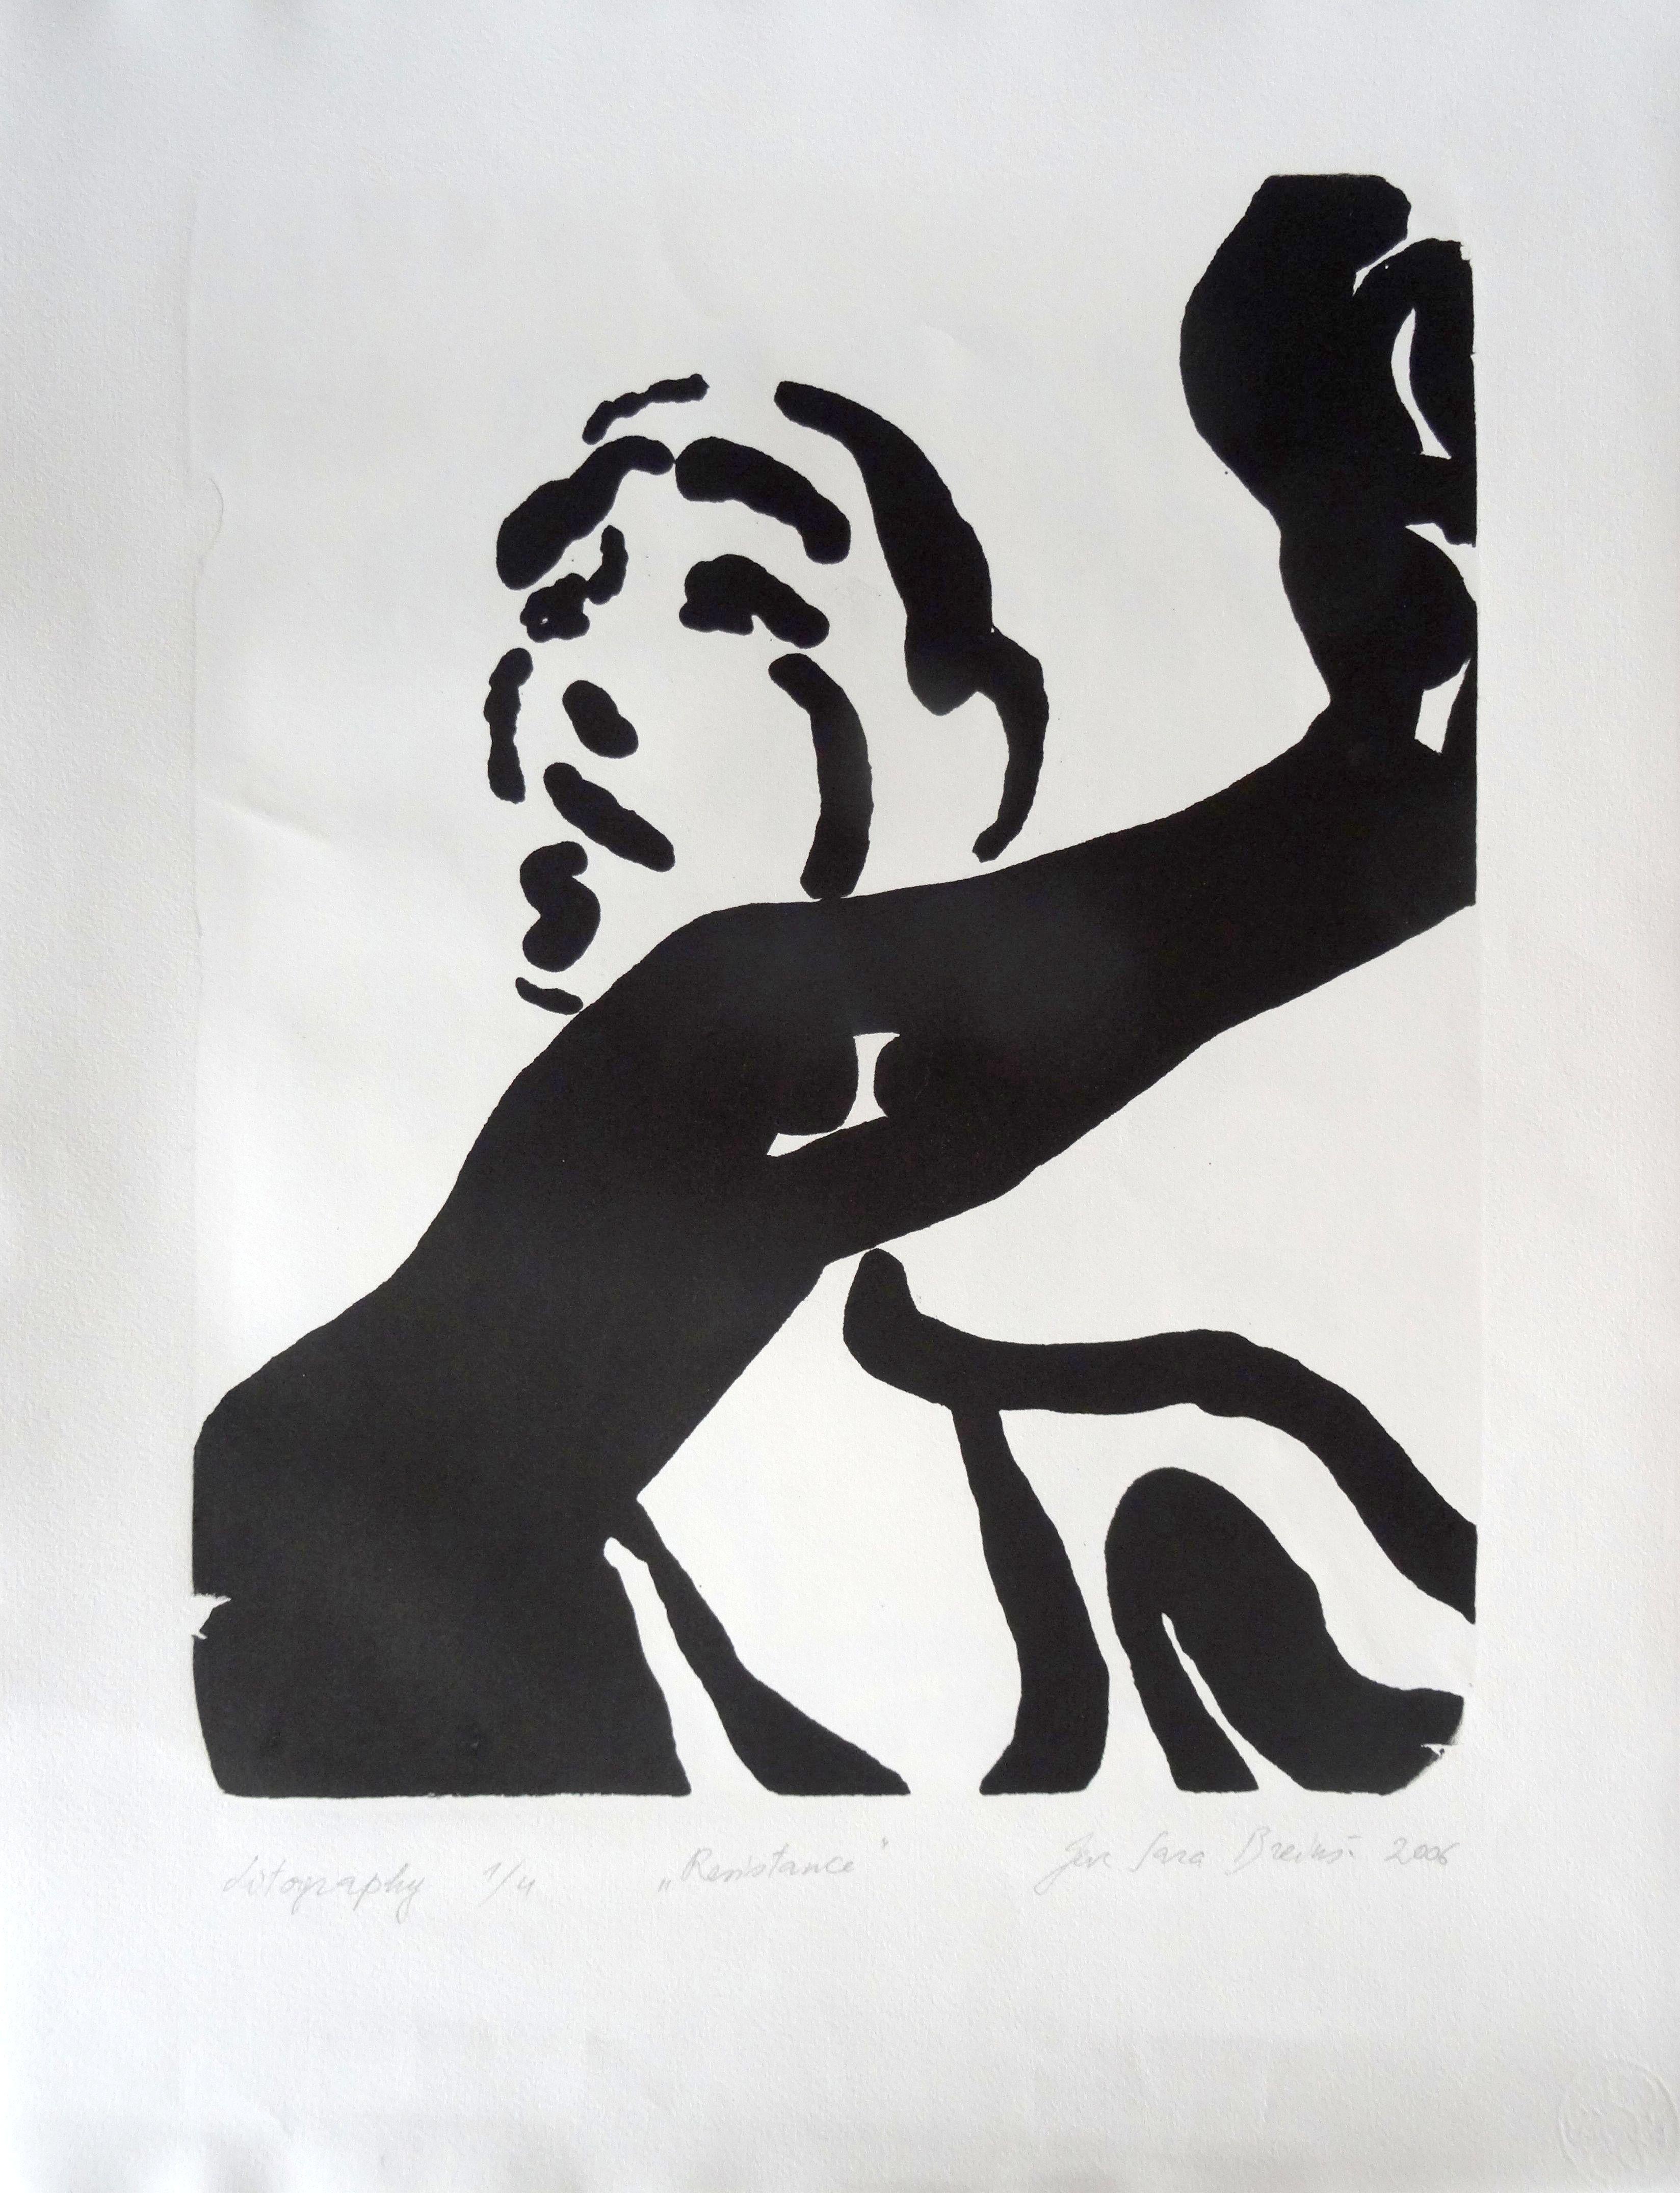 Resistance. 2006. Paper, lithography, 65x50 cm